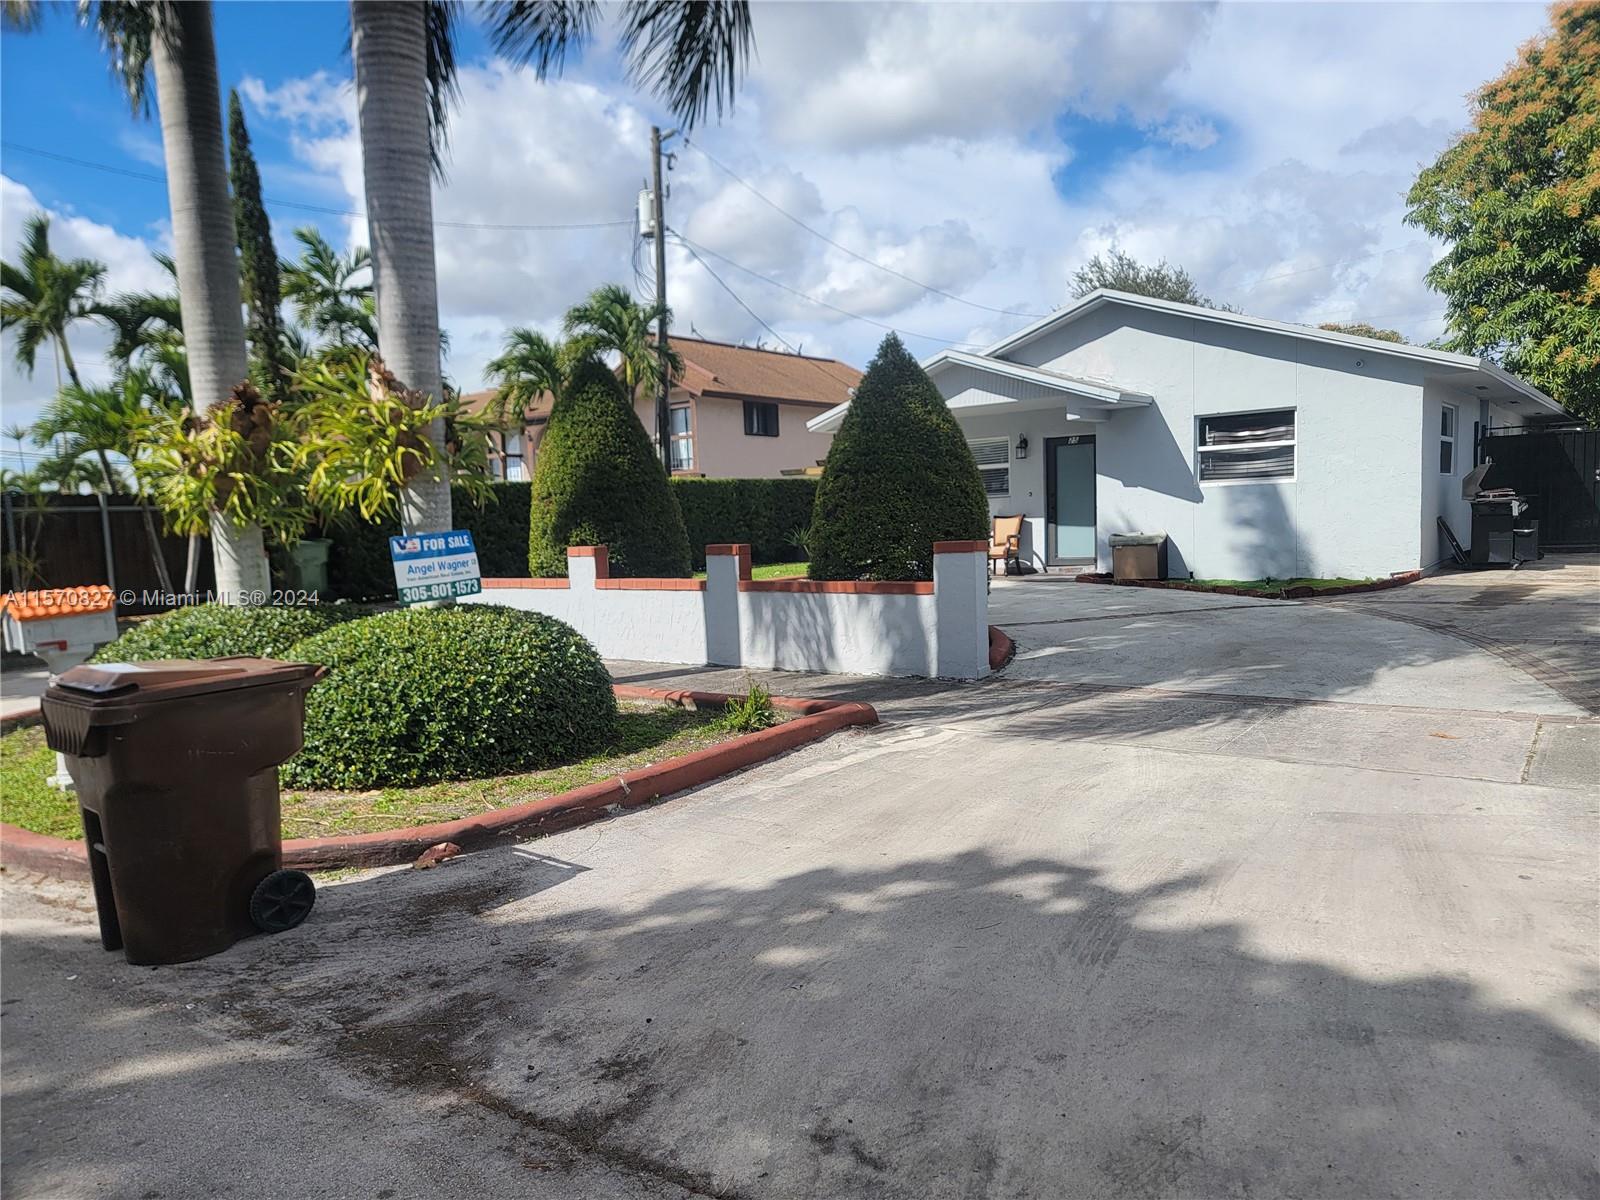 Address Not Disclosed, Hialeah, Miami-Dade County, Florida - 4 Bedrooms  
3 Bathrooms - 